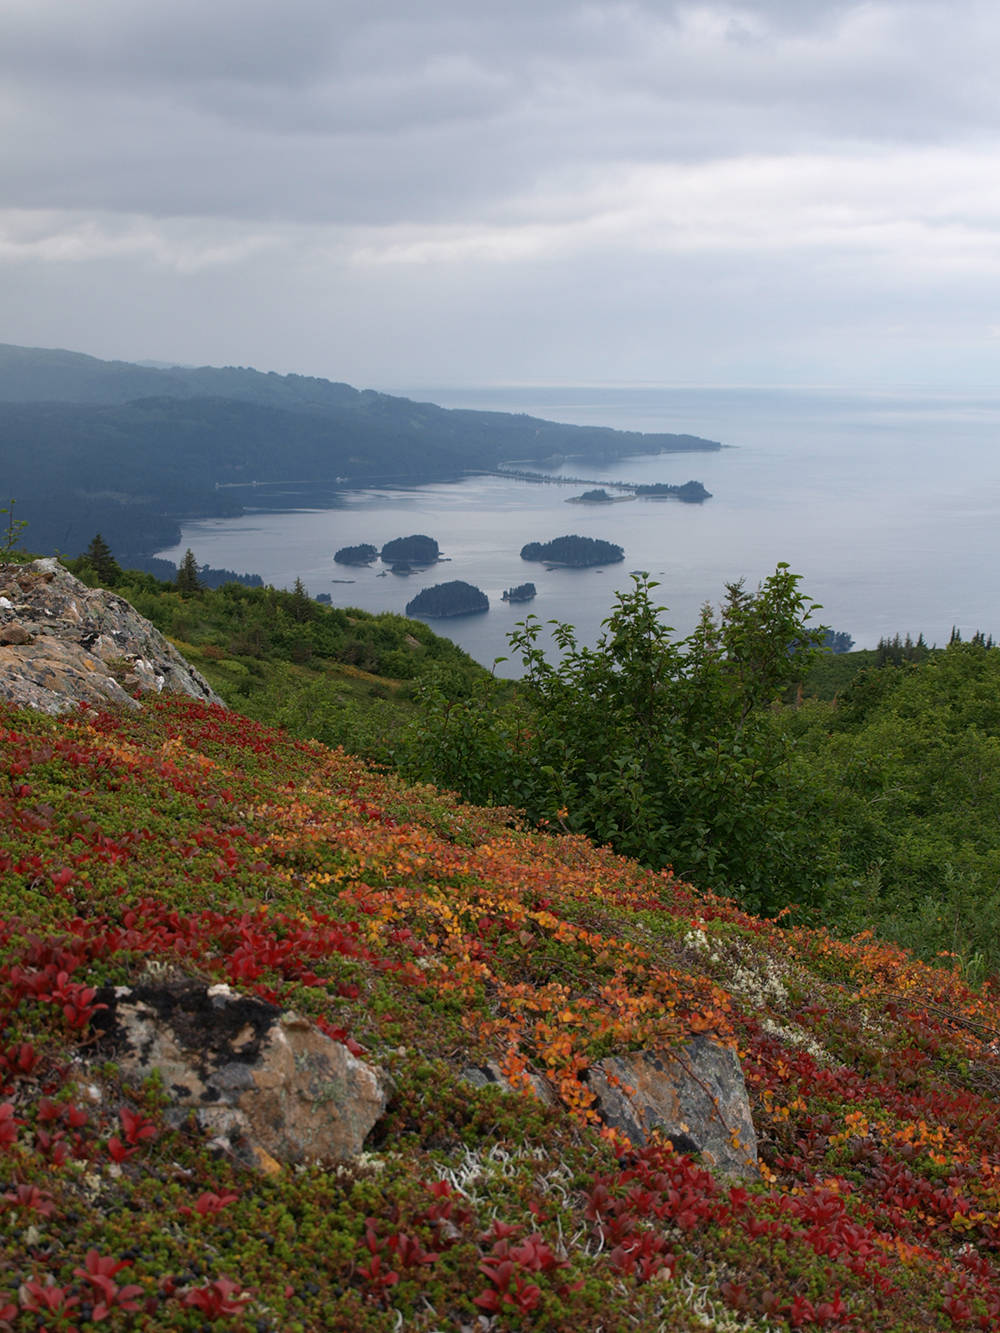 The hike up Grace Ridge can be a long slog, but the view is worth it. (Photos provided)